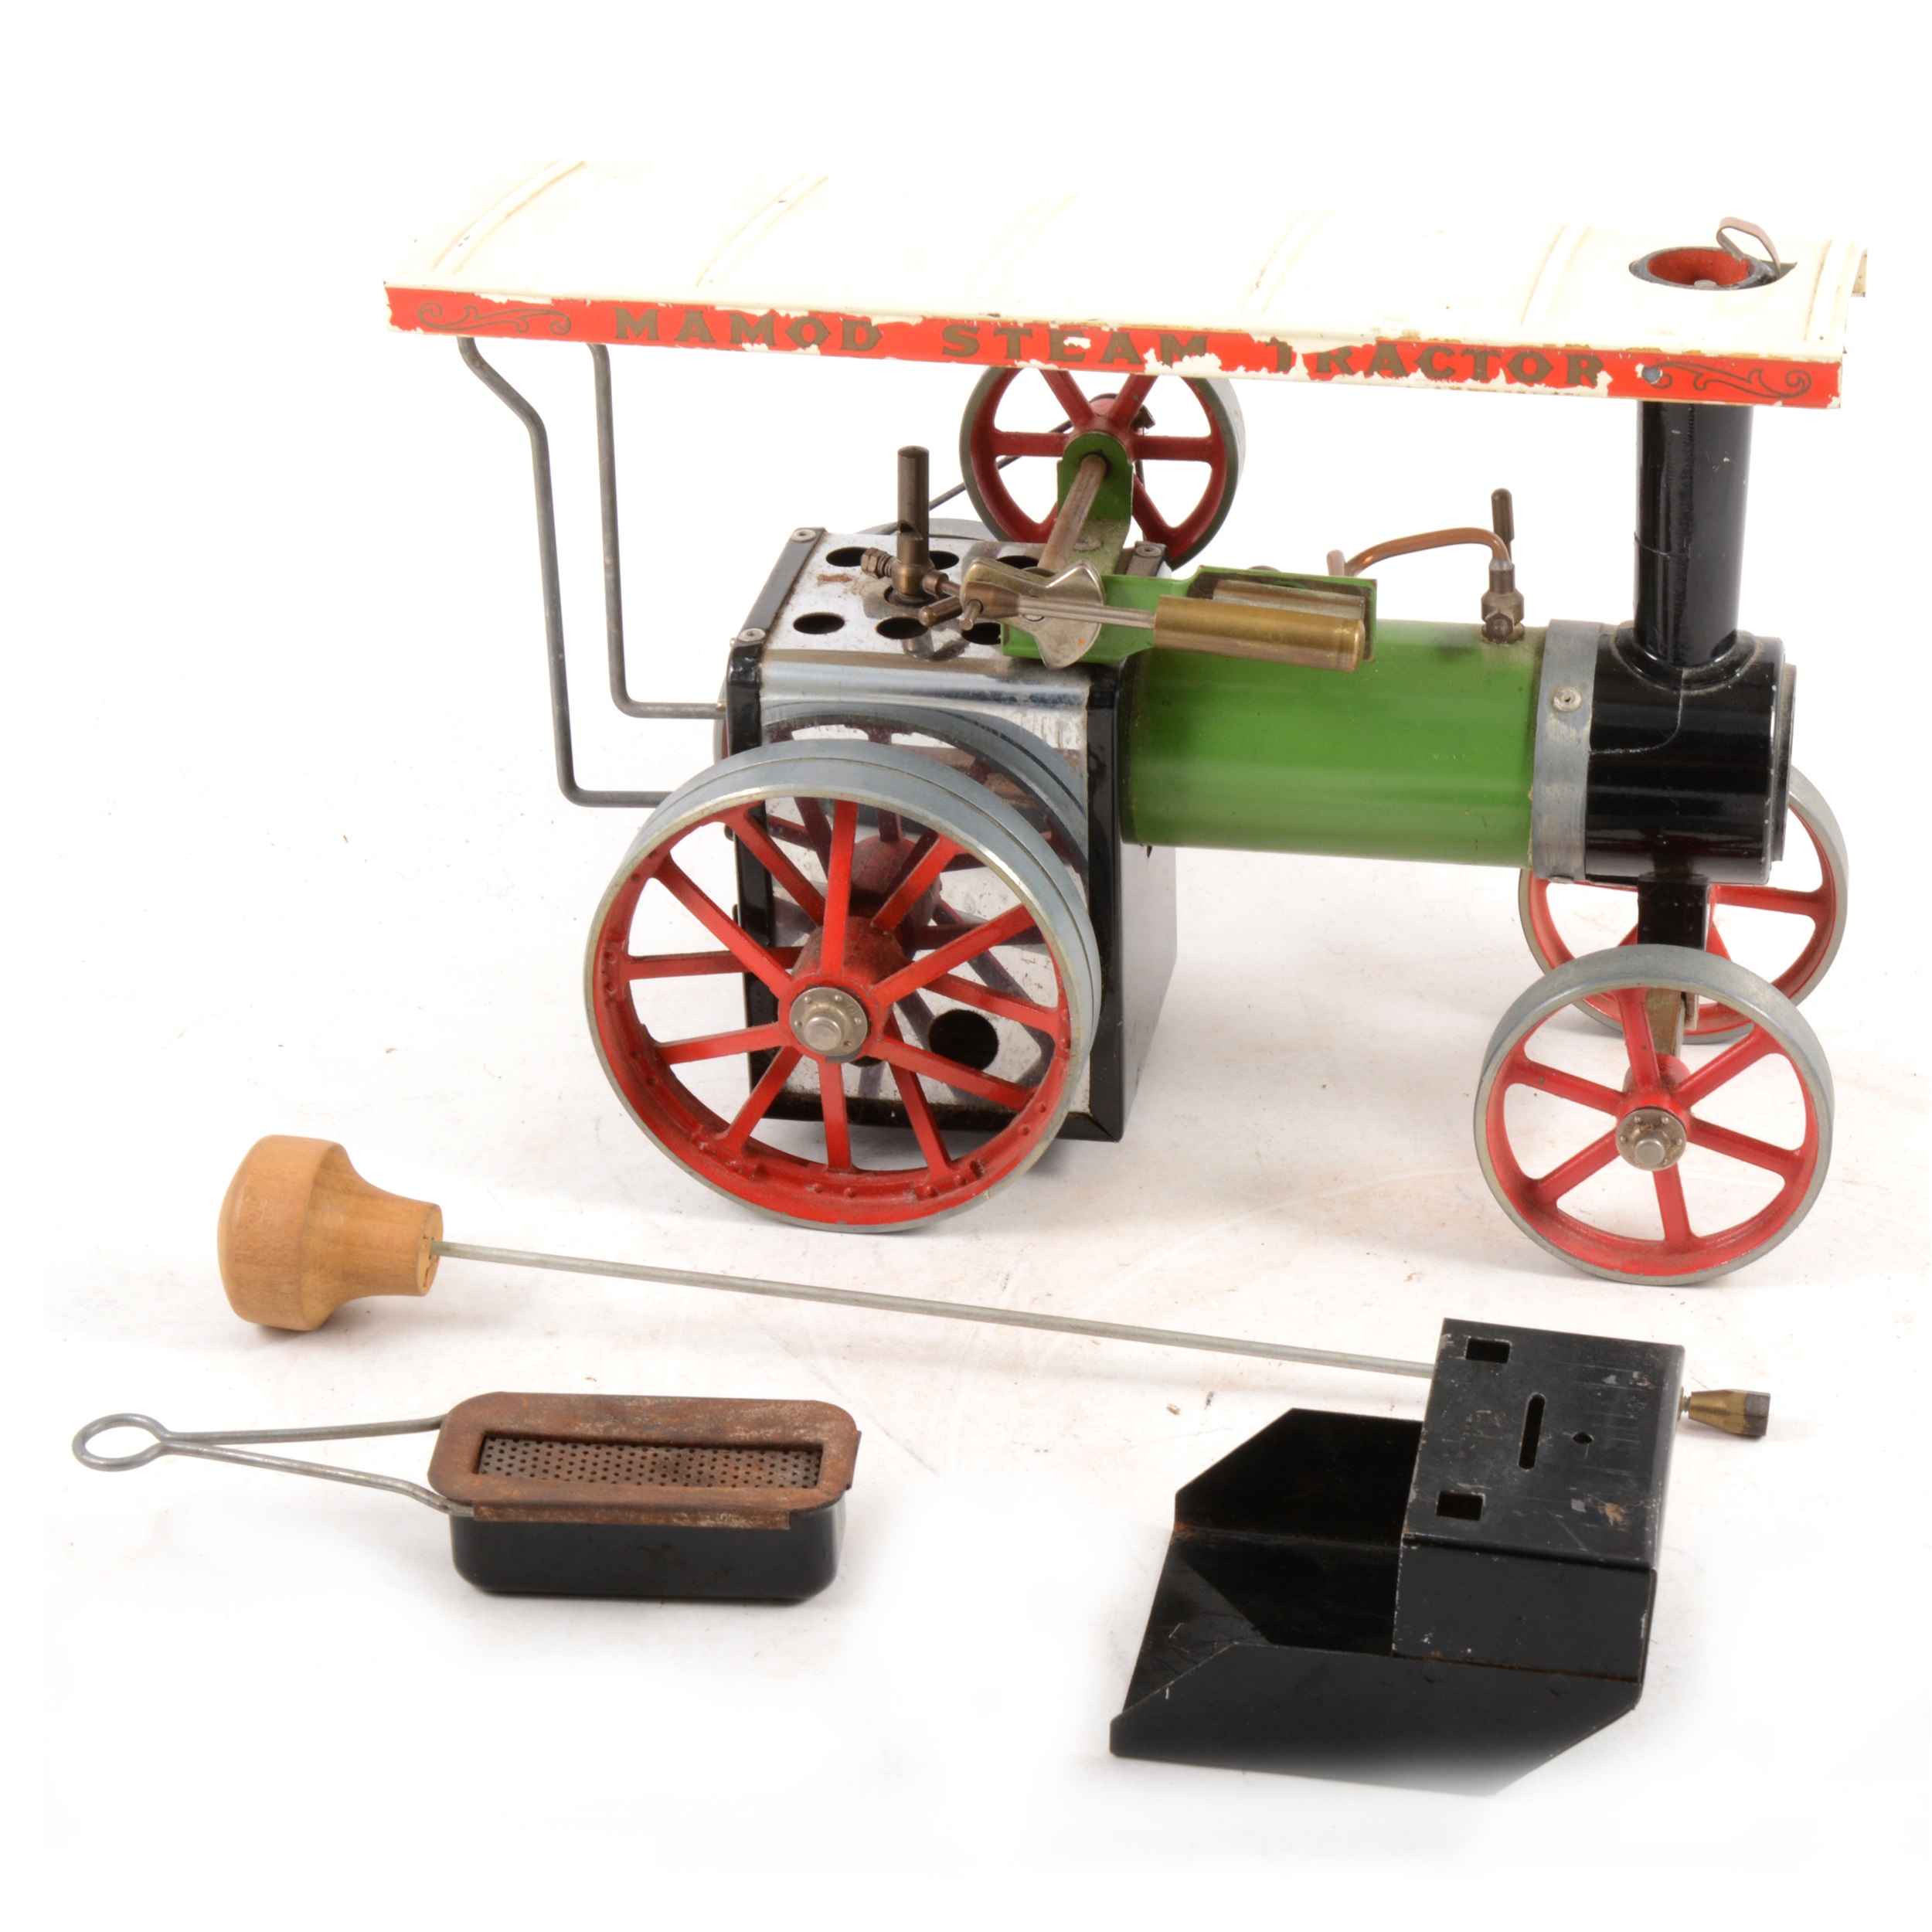 Mamod live steam showman's engine TE1, with burner and steering stick, not boxed.